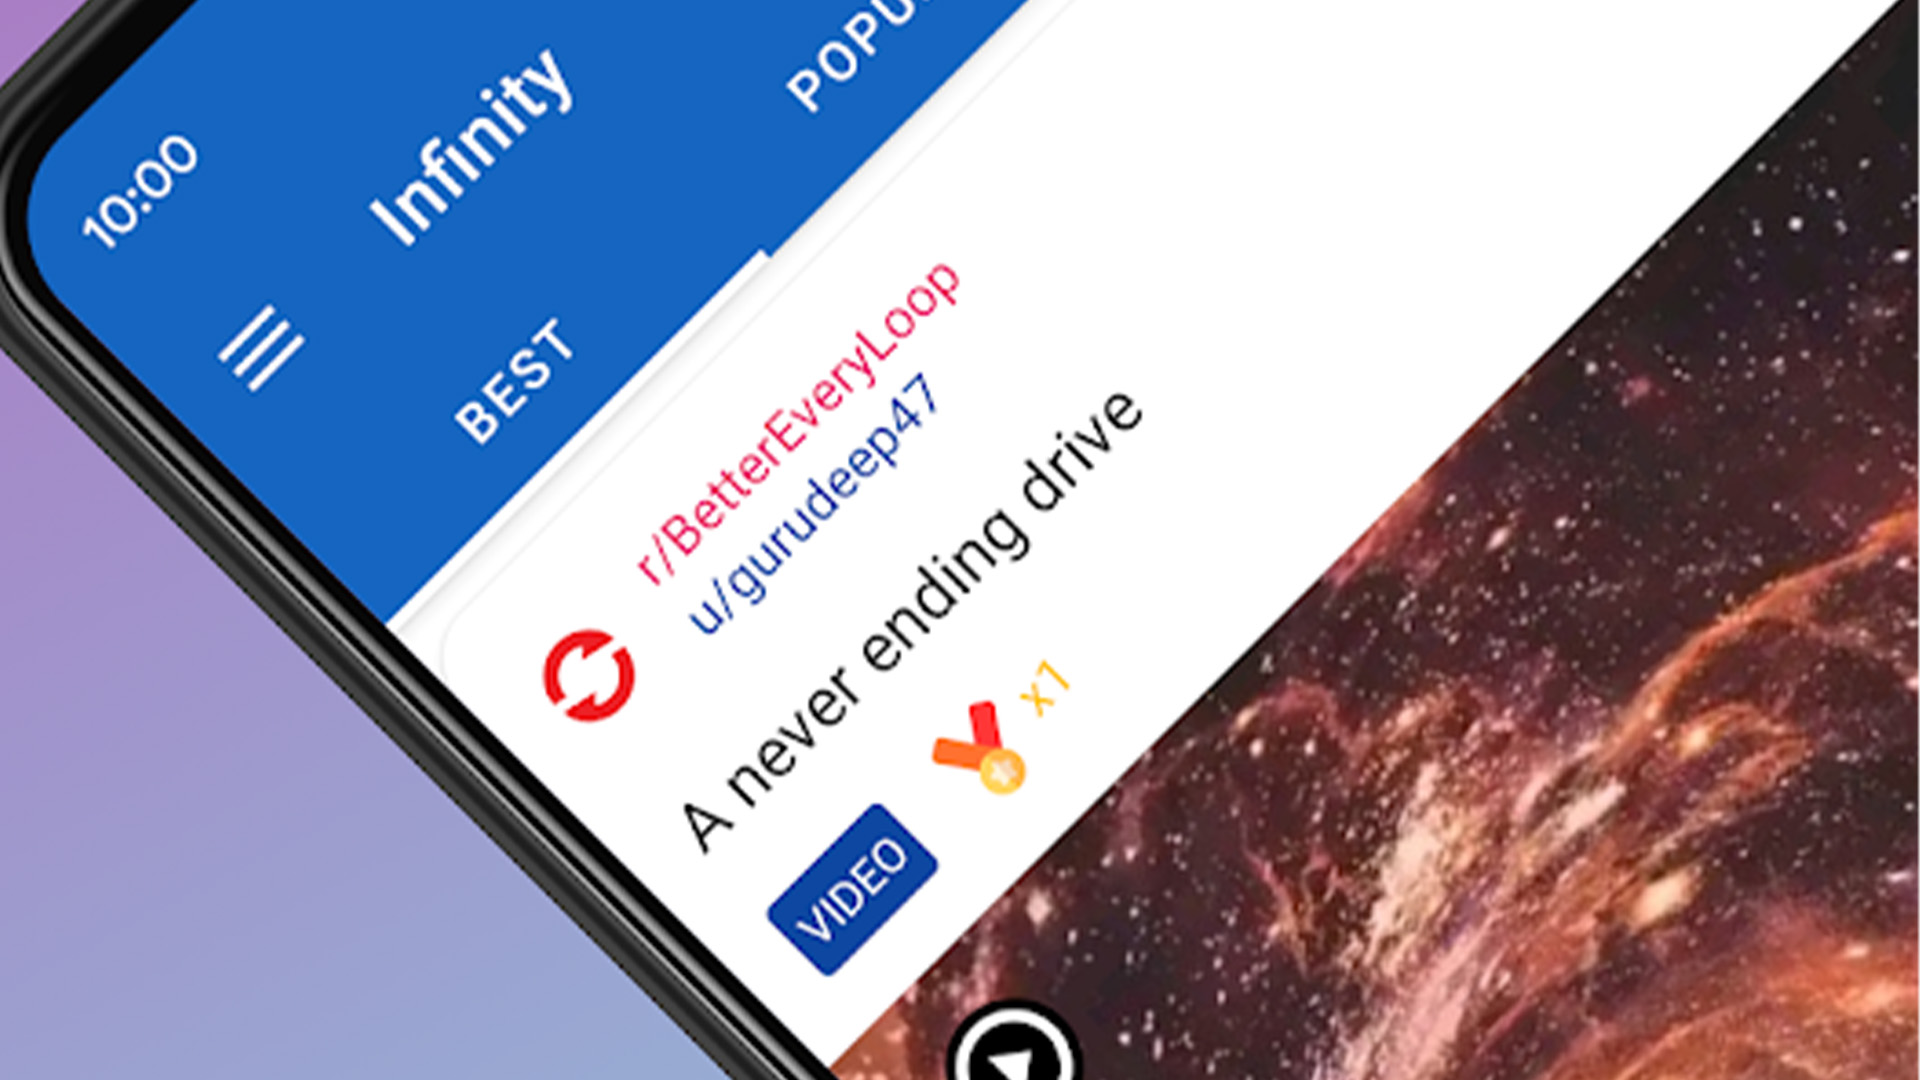 Infinity best reddit apps for android